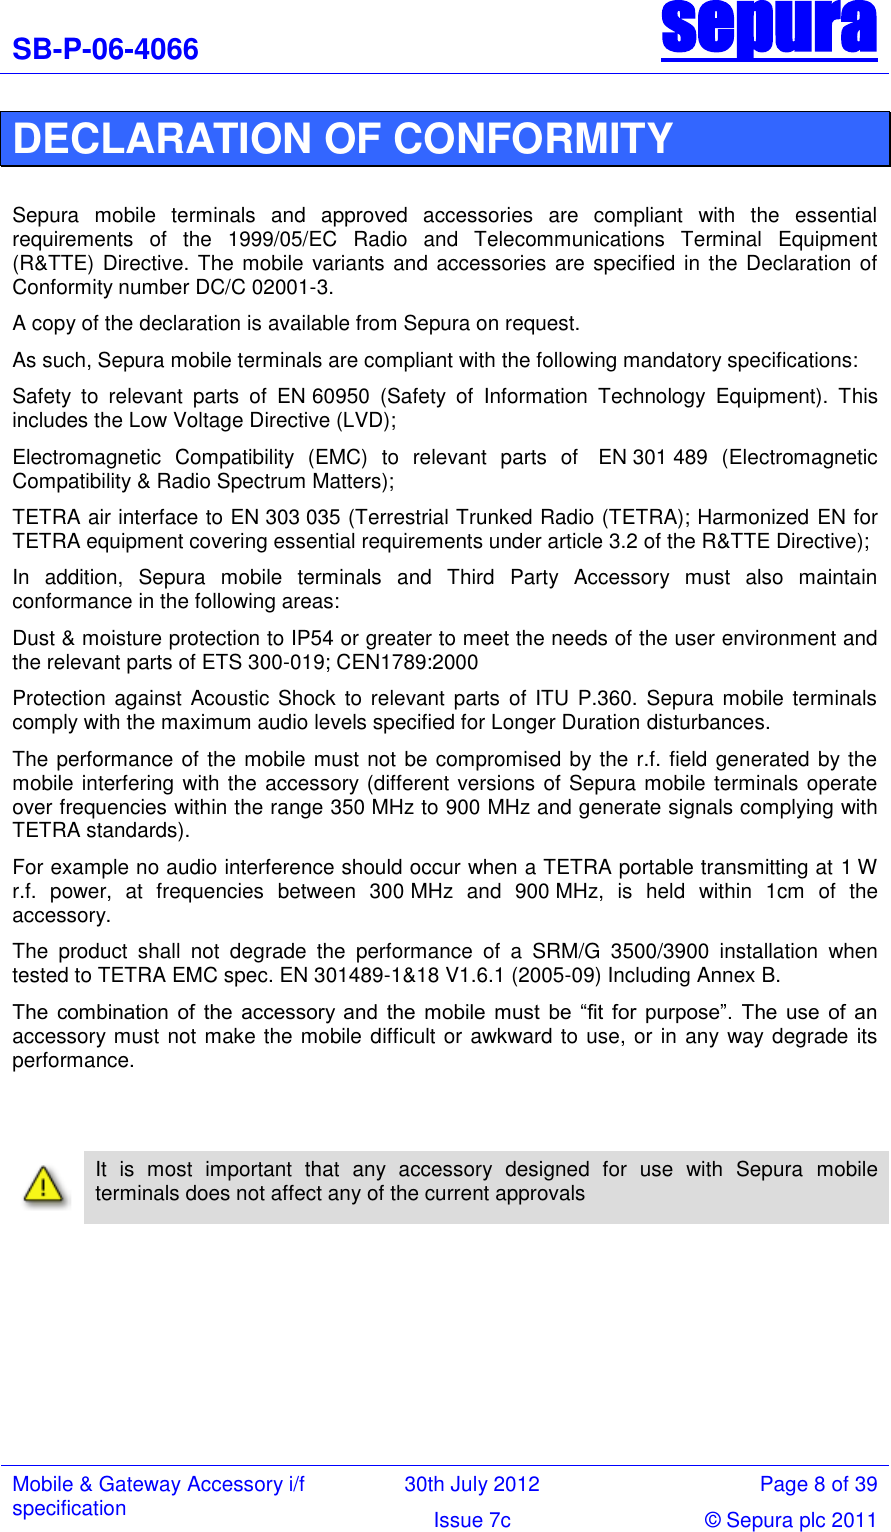 SB-P-06-4066 sepura  Mobile &amp; Gateway Accessory i/f specification 30th July 2012 Page 8 of 39 Issue 7c © Sepura plc 2011   DECLARATION OF CONFORMITY  Sepura  mobile  terminals  and  approved  accessories  are  compliant  with  the  essential requirements  of  the  1999/05/EC  Radio  and  Telecommunications  Terminal  Equipment (R&amp;TTE) Directive. The mobile variants and accessories are specified in the Declaration of Conformity number DC/C 02001-3.  A copy of the declaration is available from Sepura on request. As such, Sepura mobile terminals are compliant with the following mandatory specifications: Safety  to  relevant  parts  of  EN 60950  (Safety  of  Information  Technology  Equipment).  This includes the Low Voltage Directive (LVD);  Electromagnetic  Compatibility  (EMC)  to  relevant  parts  of   EN 301 489  (Electromagnetic Compatibility &amp; Radio Spectrum Matters);  TETRA air interface to EN 303 035 (Terrestrial Trunked Radio (TETRA); Harmonized EN for TETRA equipment covering essential requirements under article 3.2 of the R&amp;TTE Directive); In  addition,  Sepura  mobile  terminals  and  Third  Party  Accessory  must  also  maintain conformance in the following areas: Dust &amp; moisture protection to IP54 or greater to meet the needs of the user environment and the relevant parts of ETS 300-019; CEN1789:2000 Protection  against Acoustic Shock to relevant parts  of ITU P.360.  Sepura mobile terminals comply with the maximum audio levels specified for Longer Duration disturbances.  The performance of the mobile must not be compromised by the r.f. field generated by the mobile interfering with the accessory (different versions of Sepura mobile terminals operate over frequencies within the range 350 MHz to 900 MHz and generate signals complying with TETRA standards).  For example no audio interference should occur when a TETRA portable transmitting at 1 W r.f.  power,  at  frequencies  between  300 MHz  and  900 MHz,  is  held  within  1cm  of  the accessory. The  product  shall  not  degrade  the  performance  of  a  SRM/G  3500/3900  installation  when tested to TETRA EMC spec. EN 301489-1&amp;18 V1.6.1 (2005-09) Including Annex B. The  combination  of  the  accessory  and  the  mobile  must  be  ―fit  for  purpose‖.  The  use  of  an accessory must not make the mobile difficult or awkward to use, or in any way degrade its performance.       It  is  most  important  that  any  accessory  designed  for  use  with  Sepura  mobile terminals does not affect any of the current approvals         